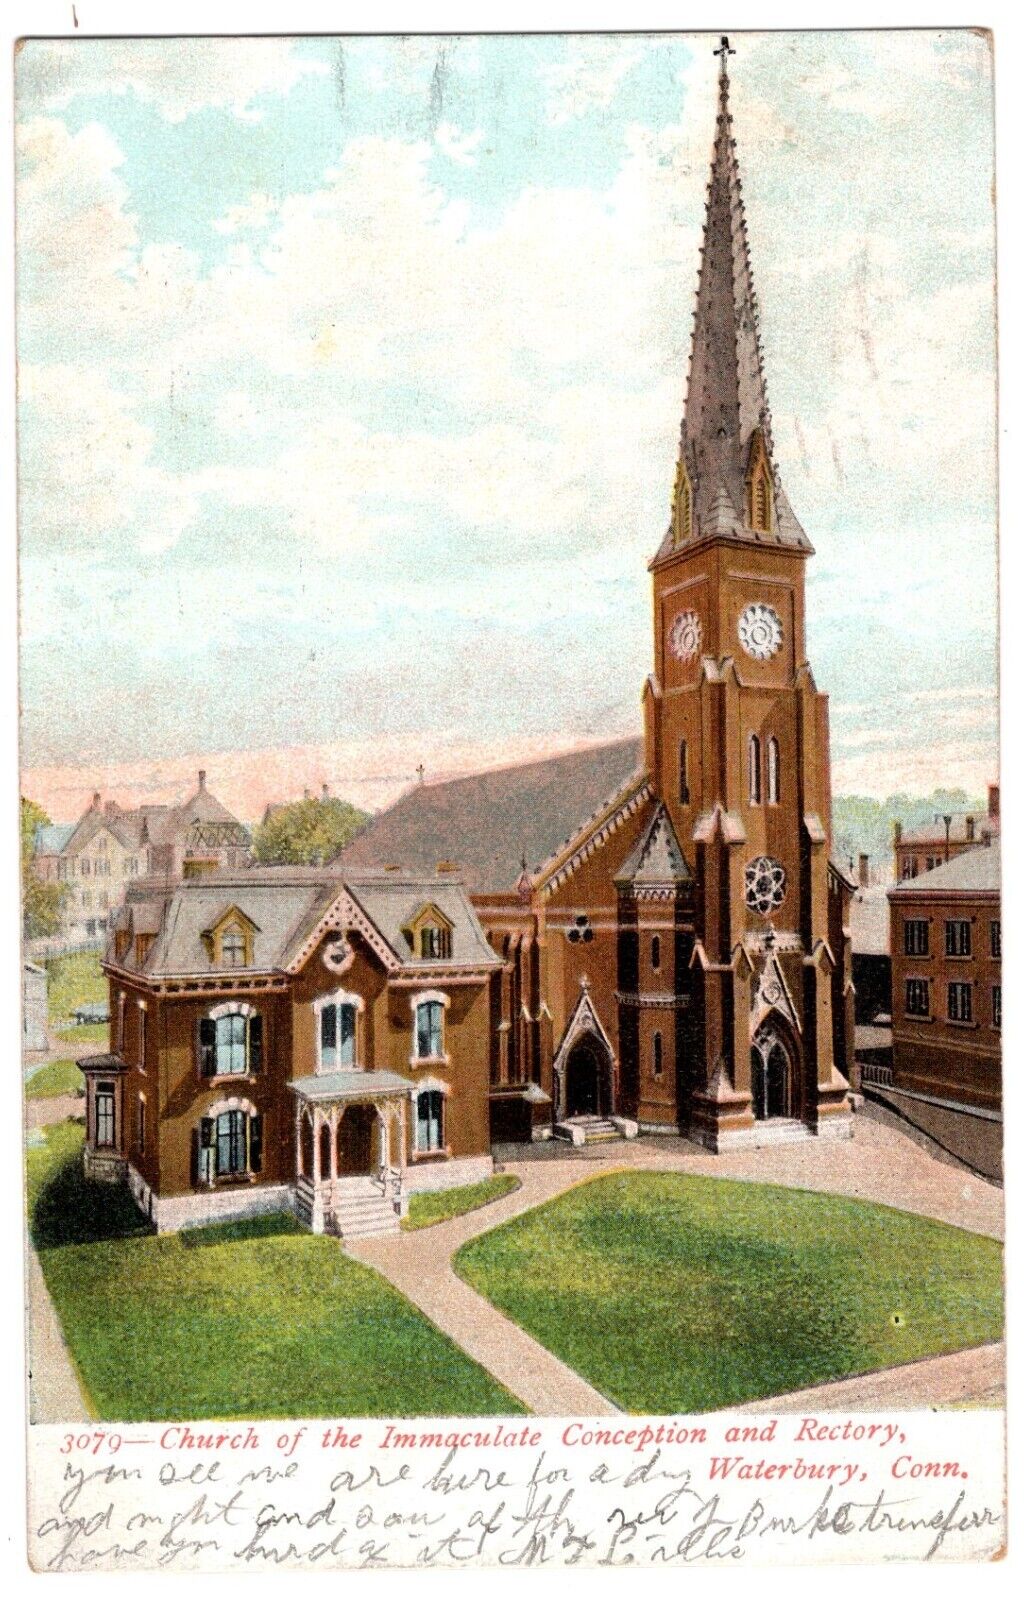 Church of the Immaculate Conception, Waterbury, CONN. POST CARD. C. 1910's